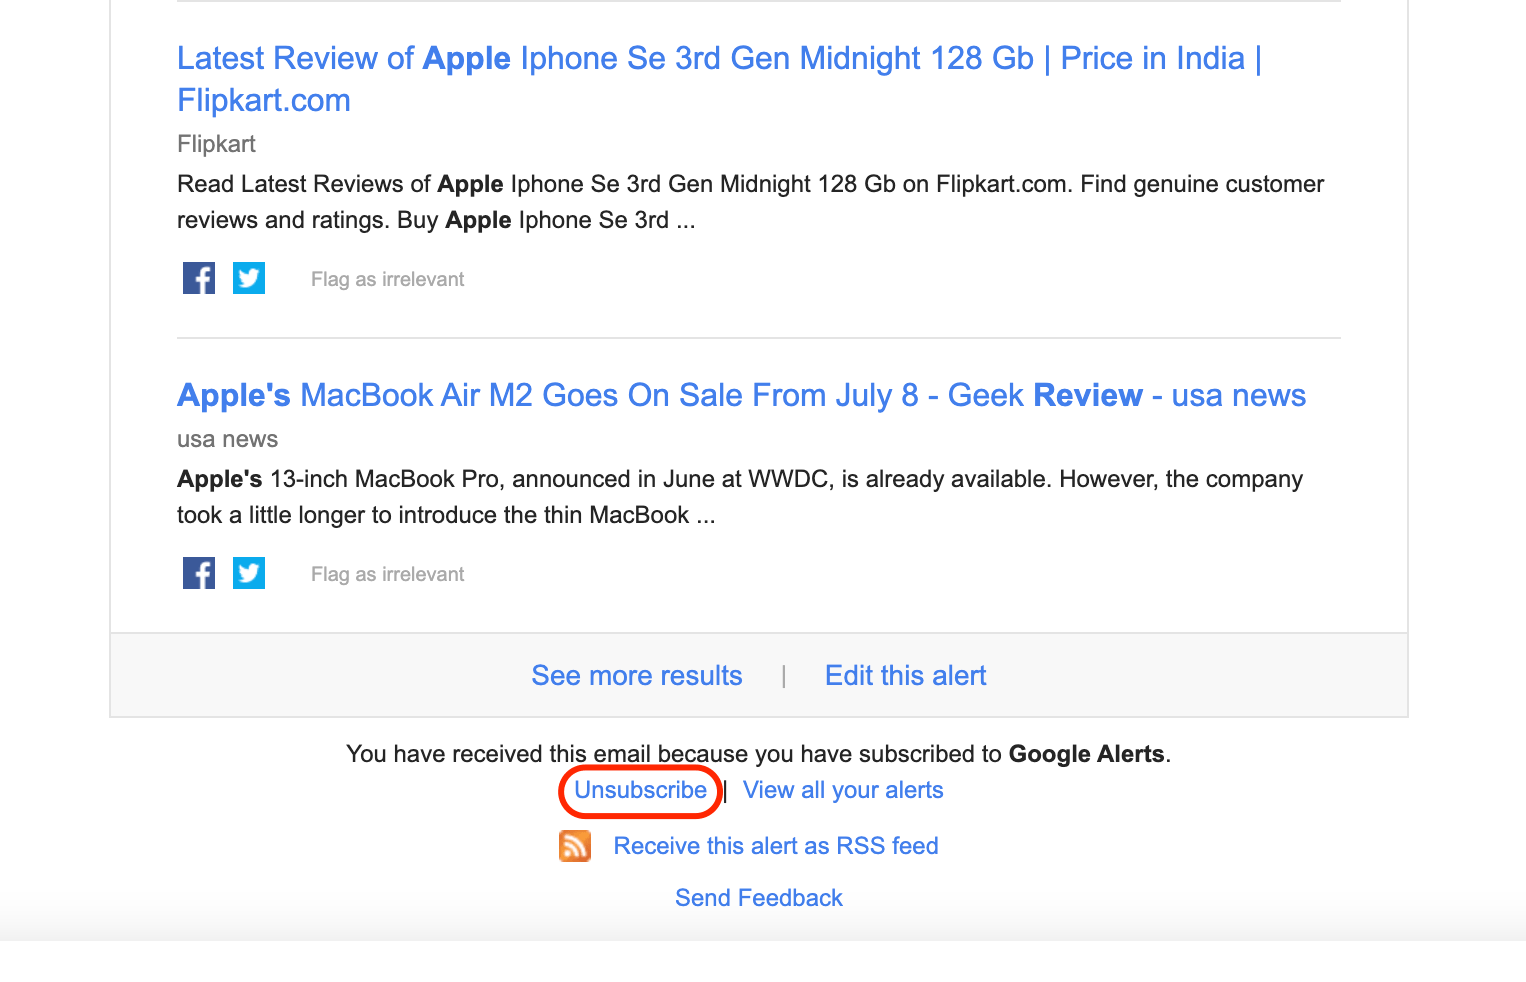 Unsubscribe from Google Alerts